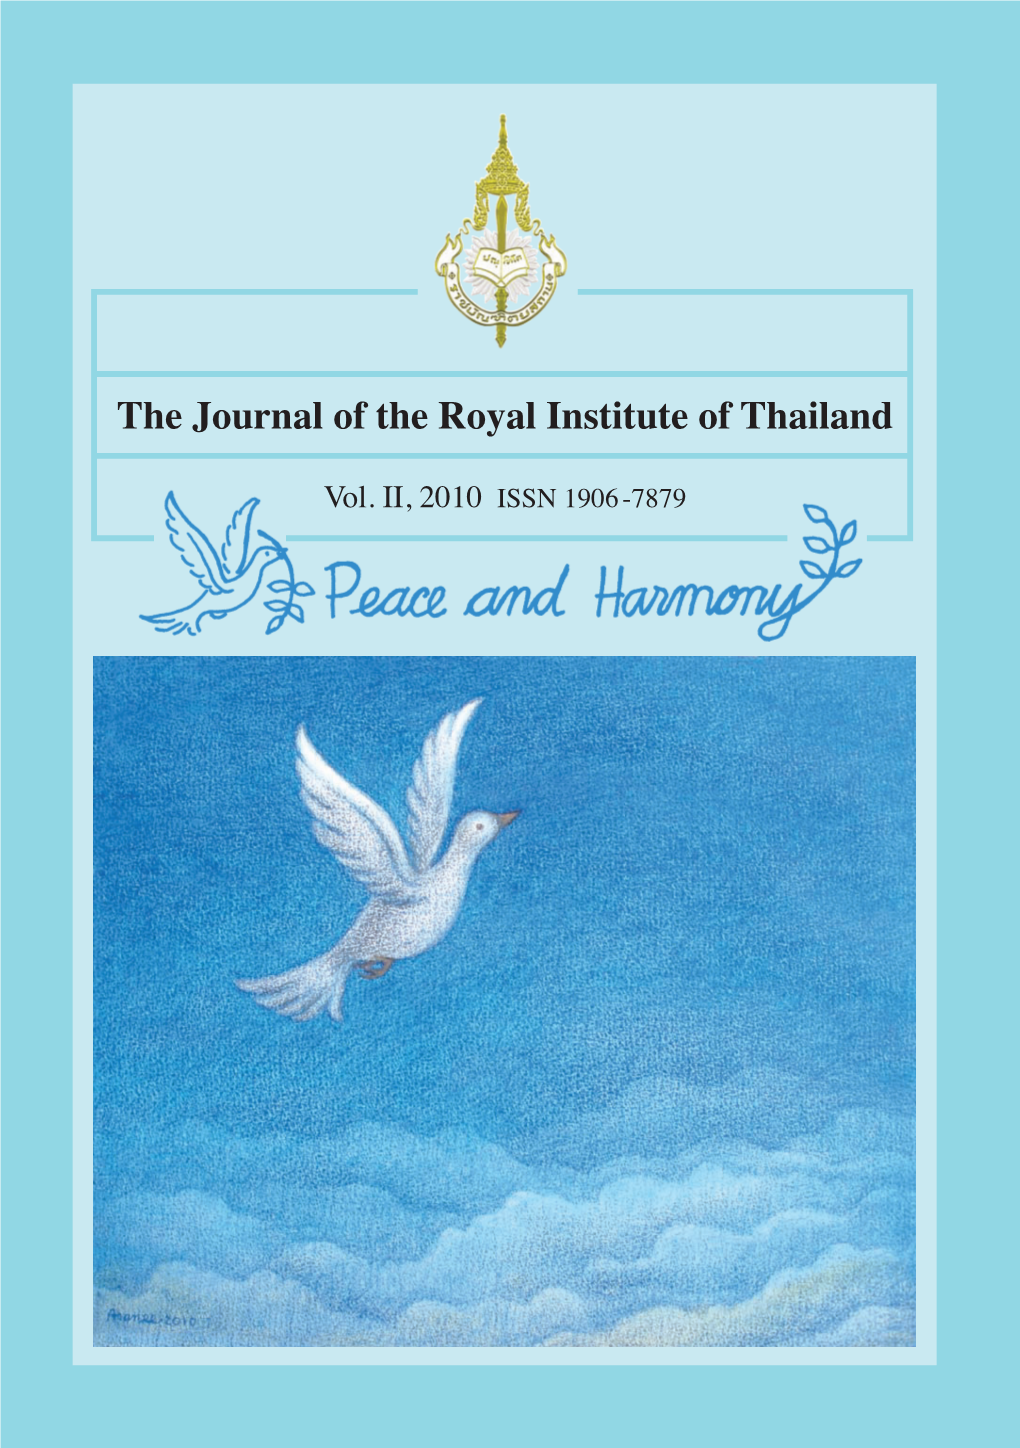 The Journal of the Royal Institute of Thailand